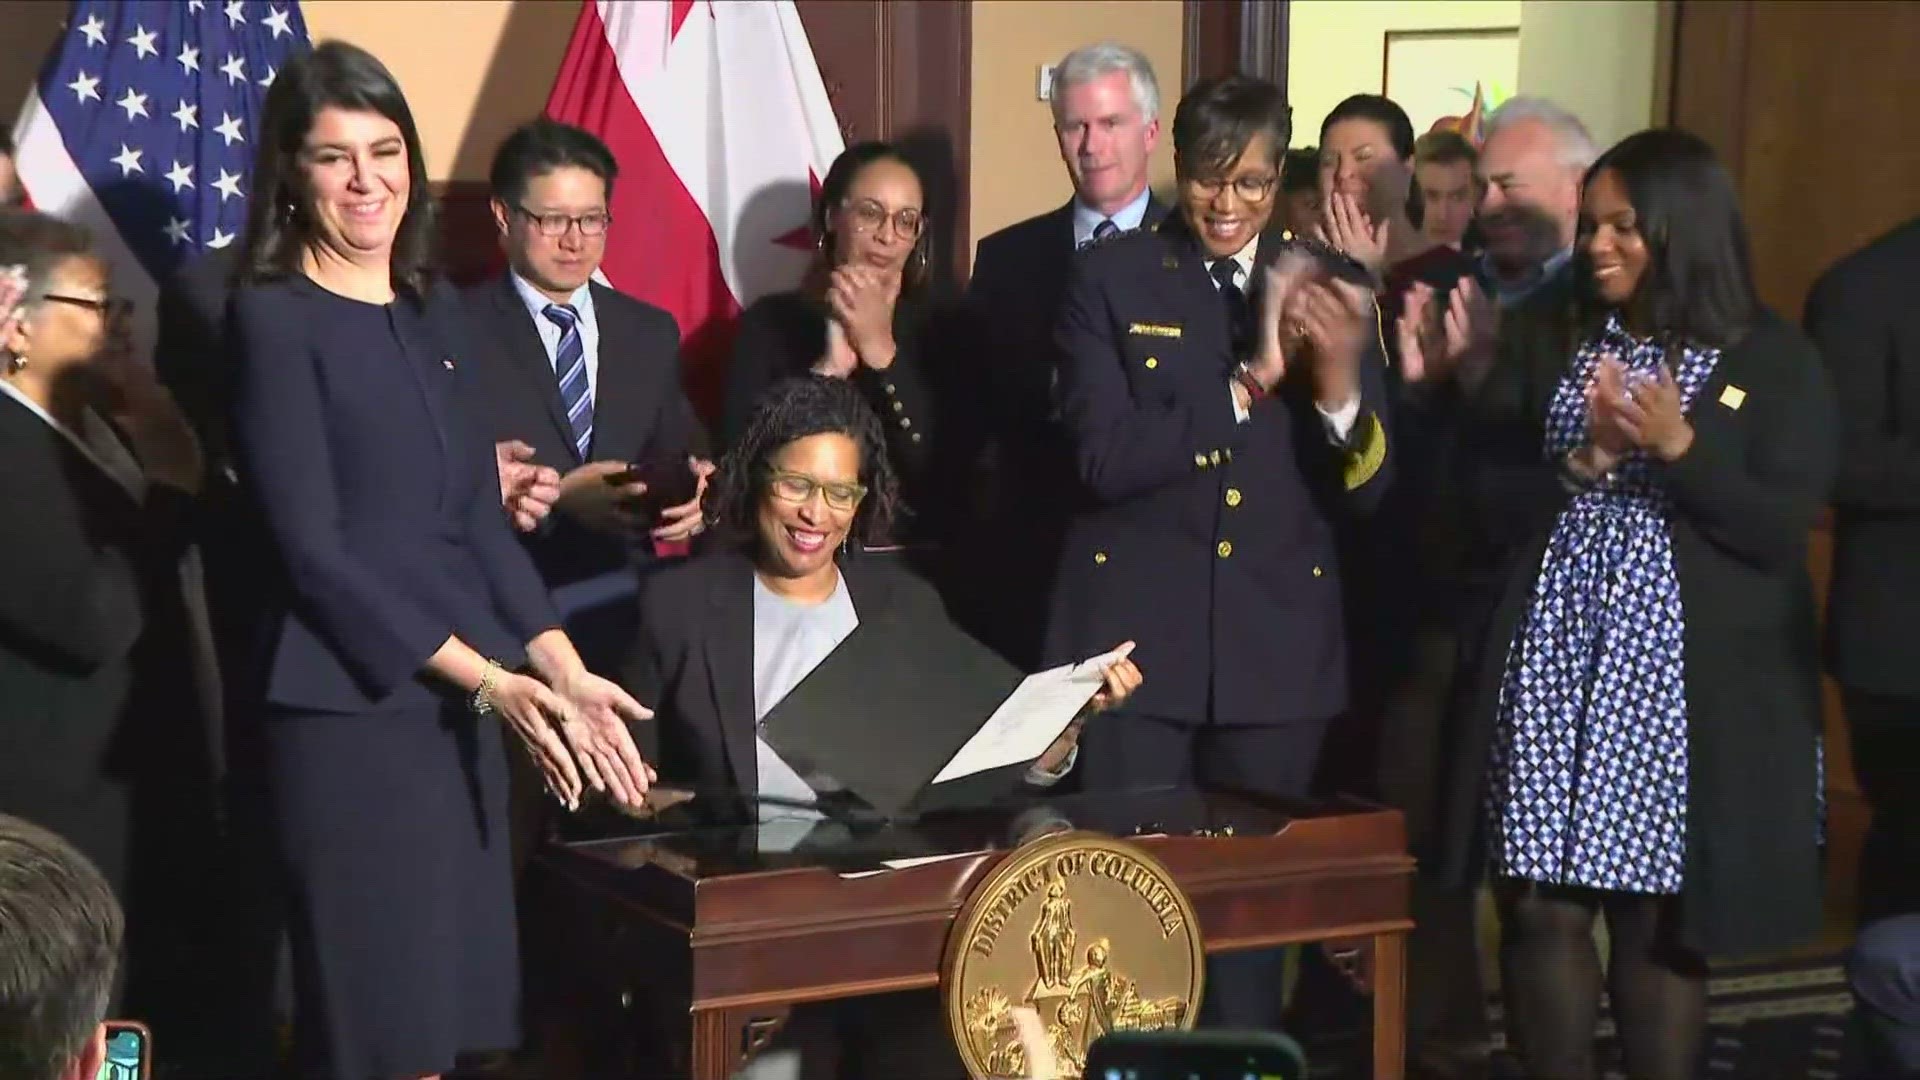 DC Mayor Muriel Bowser signed that massive Secure DC crime bill into law.